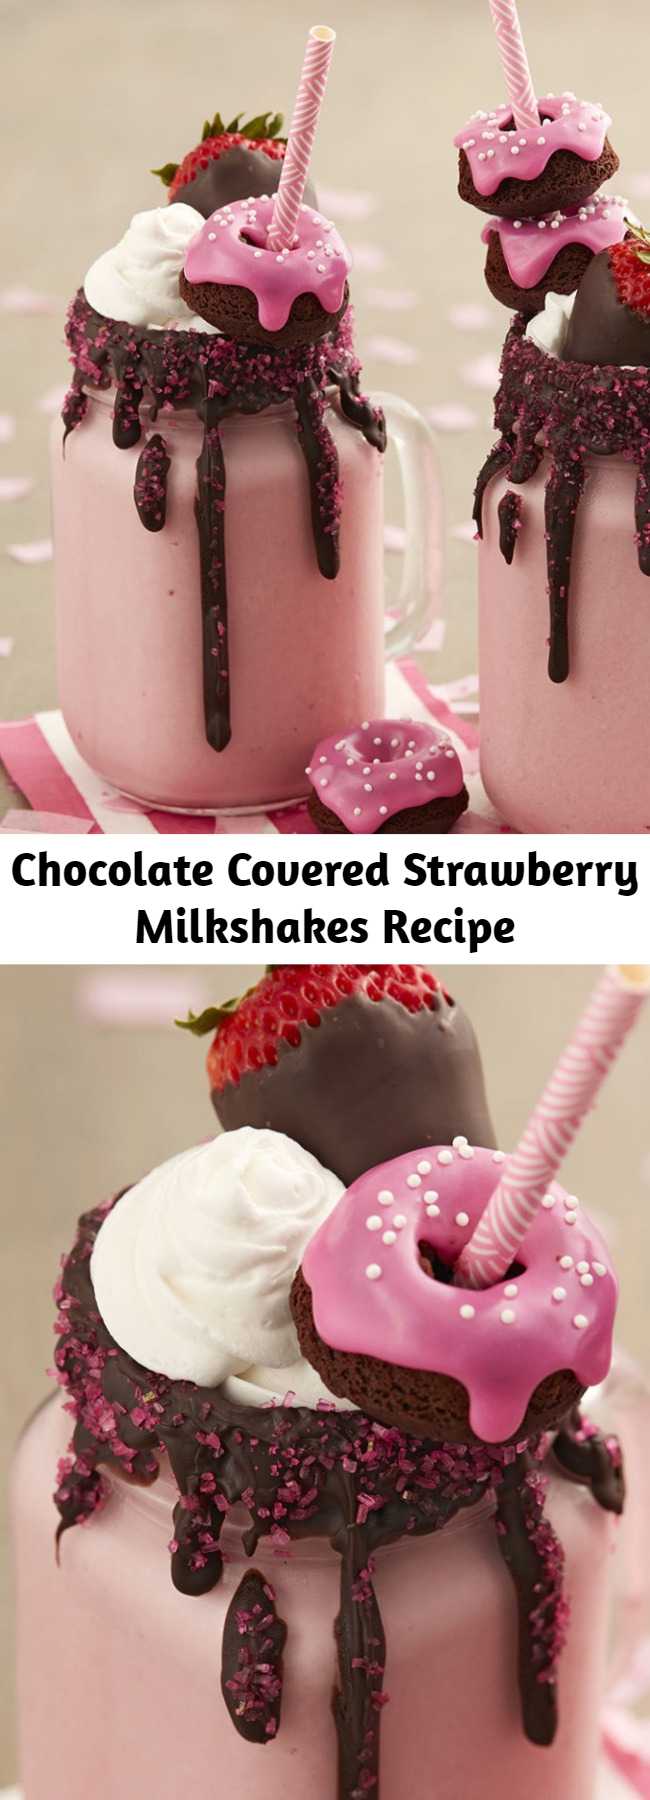 Chocolate Covered Strawberry Milkshakes Recipe - Get the goodness of chocolate covered strawberries in a glass! Dark Cocoa Candy Melts blend perfectly with strawberry ice cream. Top it all off with sparkling sugar, a mini chocolate doughnut and a chocolate covered strawberry, of course.